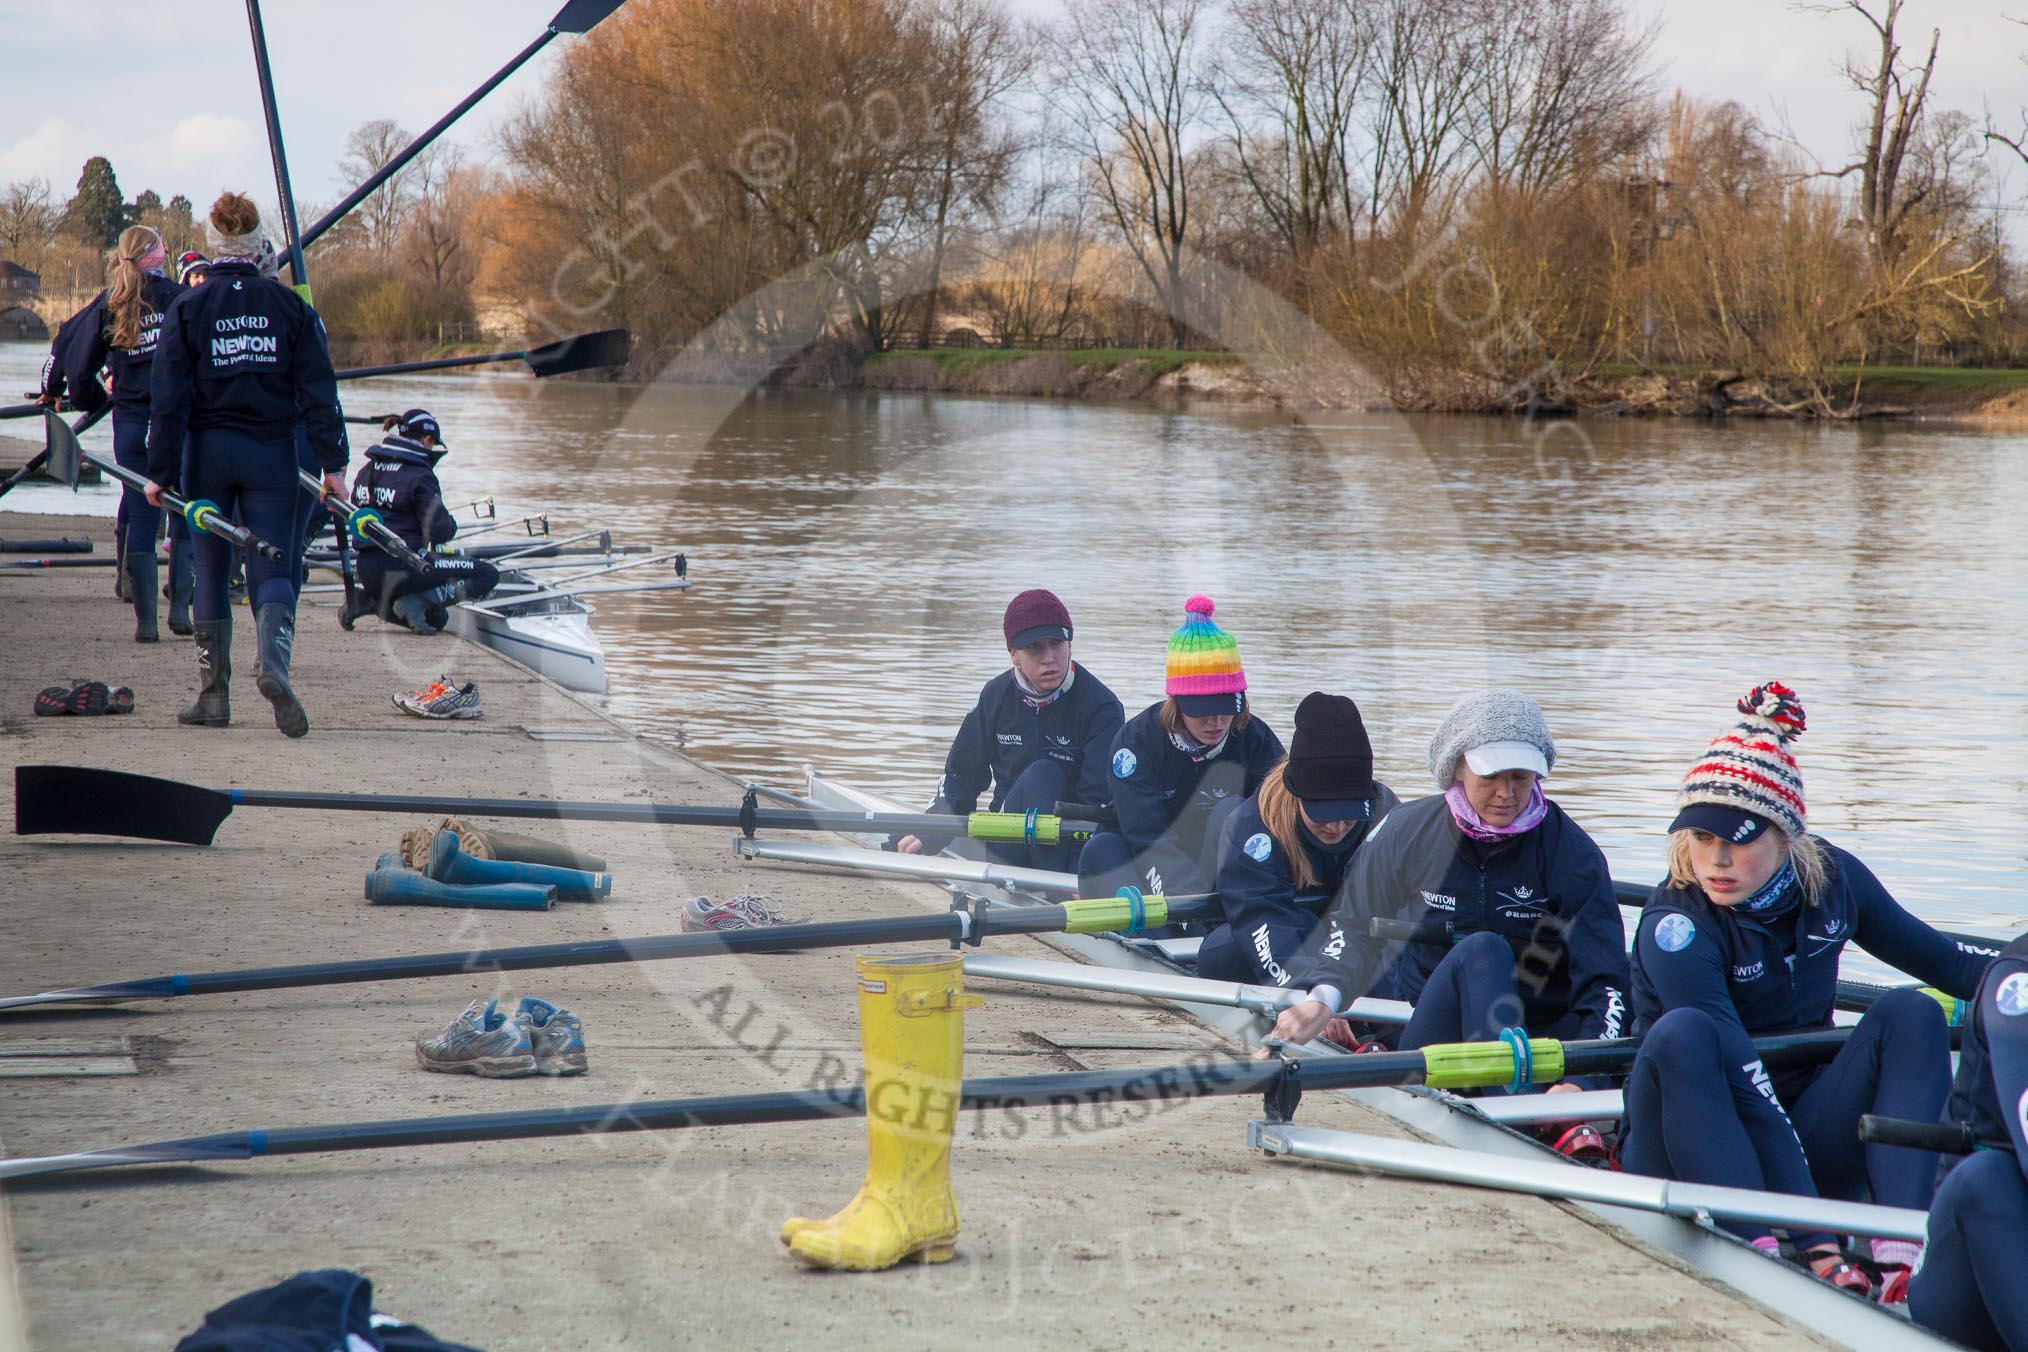 The Boat Race season 2013 - OUWBC training: The OUWBC Blue Boat squad getting ready at Fleming Boathouse - bow Mariann Novak, Alice Carrington-Windo, Mary Foord-Weston, Jo Lee, Amy Varney, Harriet Keane, Anastasia Chitty, stroke Maxie Scheske, and cox Katie Apfelbaum. In the background the Osiris crew..
Fleming Boathouse,
Wallingford,
Oxfordshire,
United Kingdom,
on 13 March 2013 at 16:51, image #28